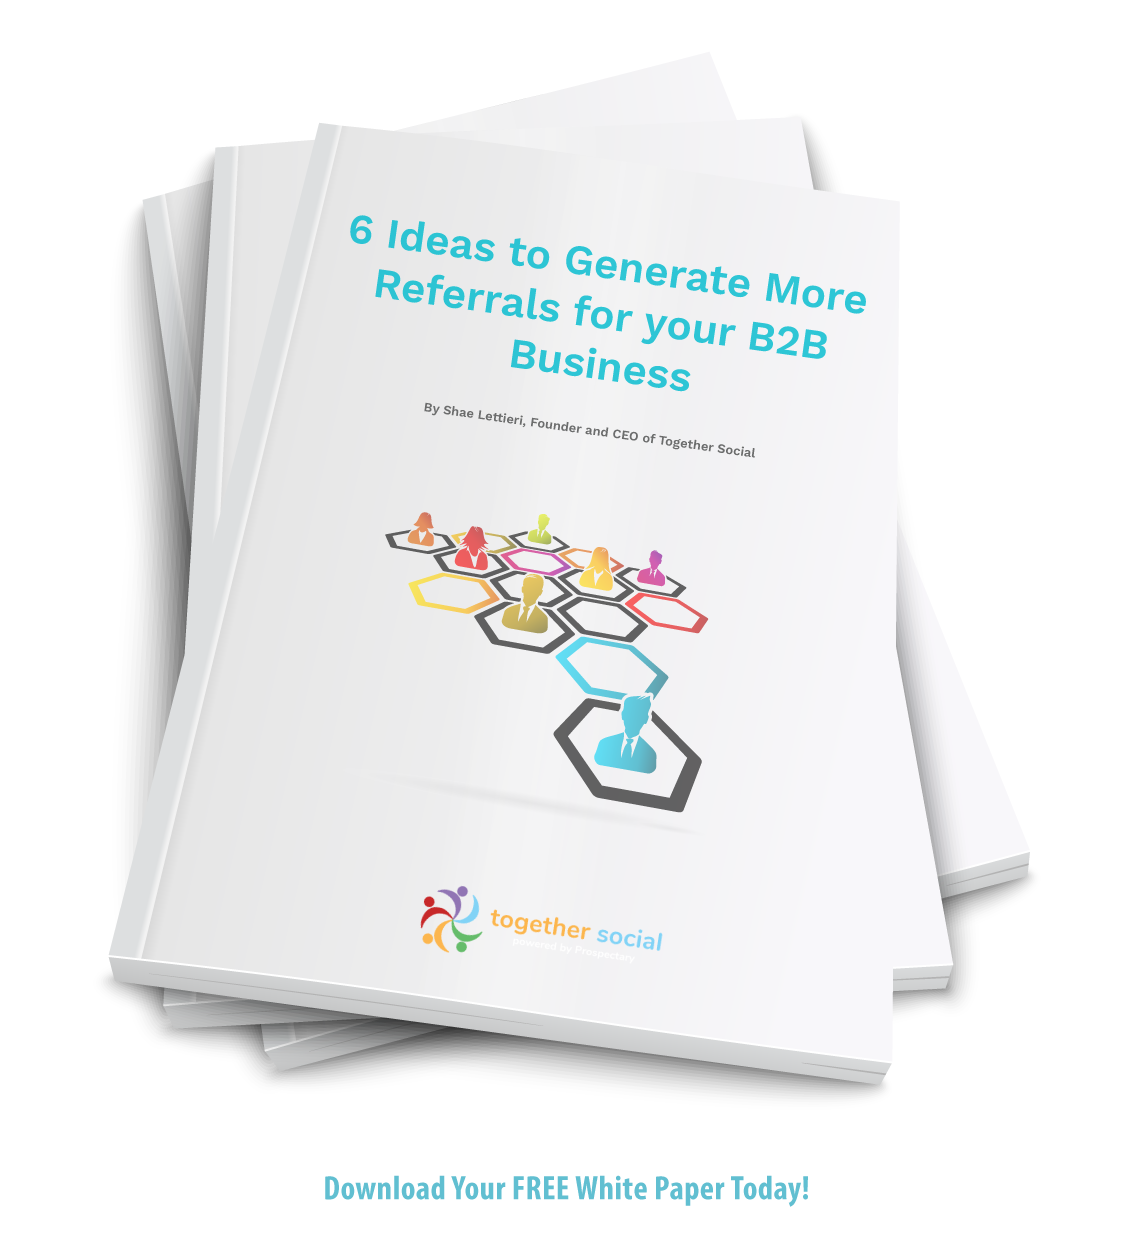 6-Ideas-to-Generate-More-Referrals-for-your-B2B-Business-Free-Download